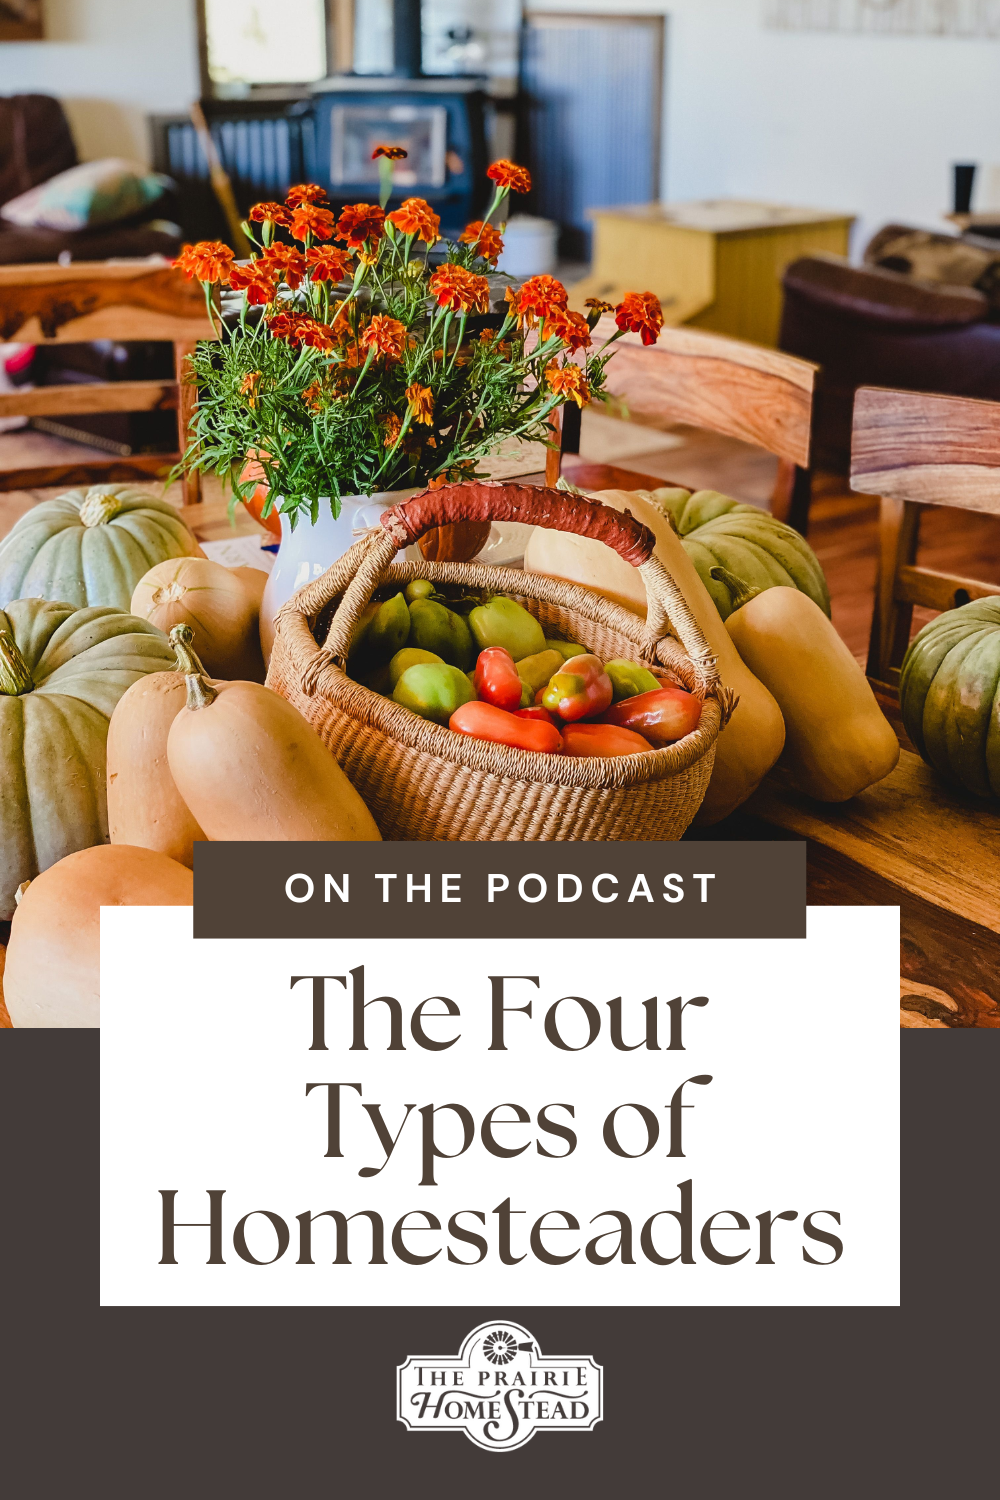 The 4 Types of Homesteaders